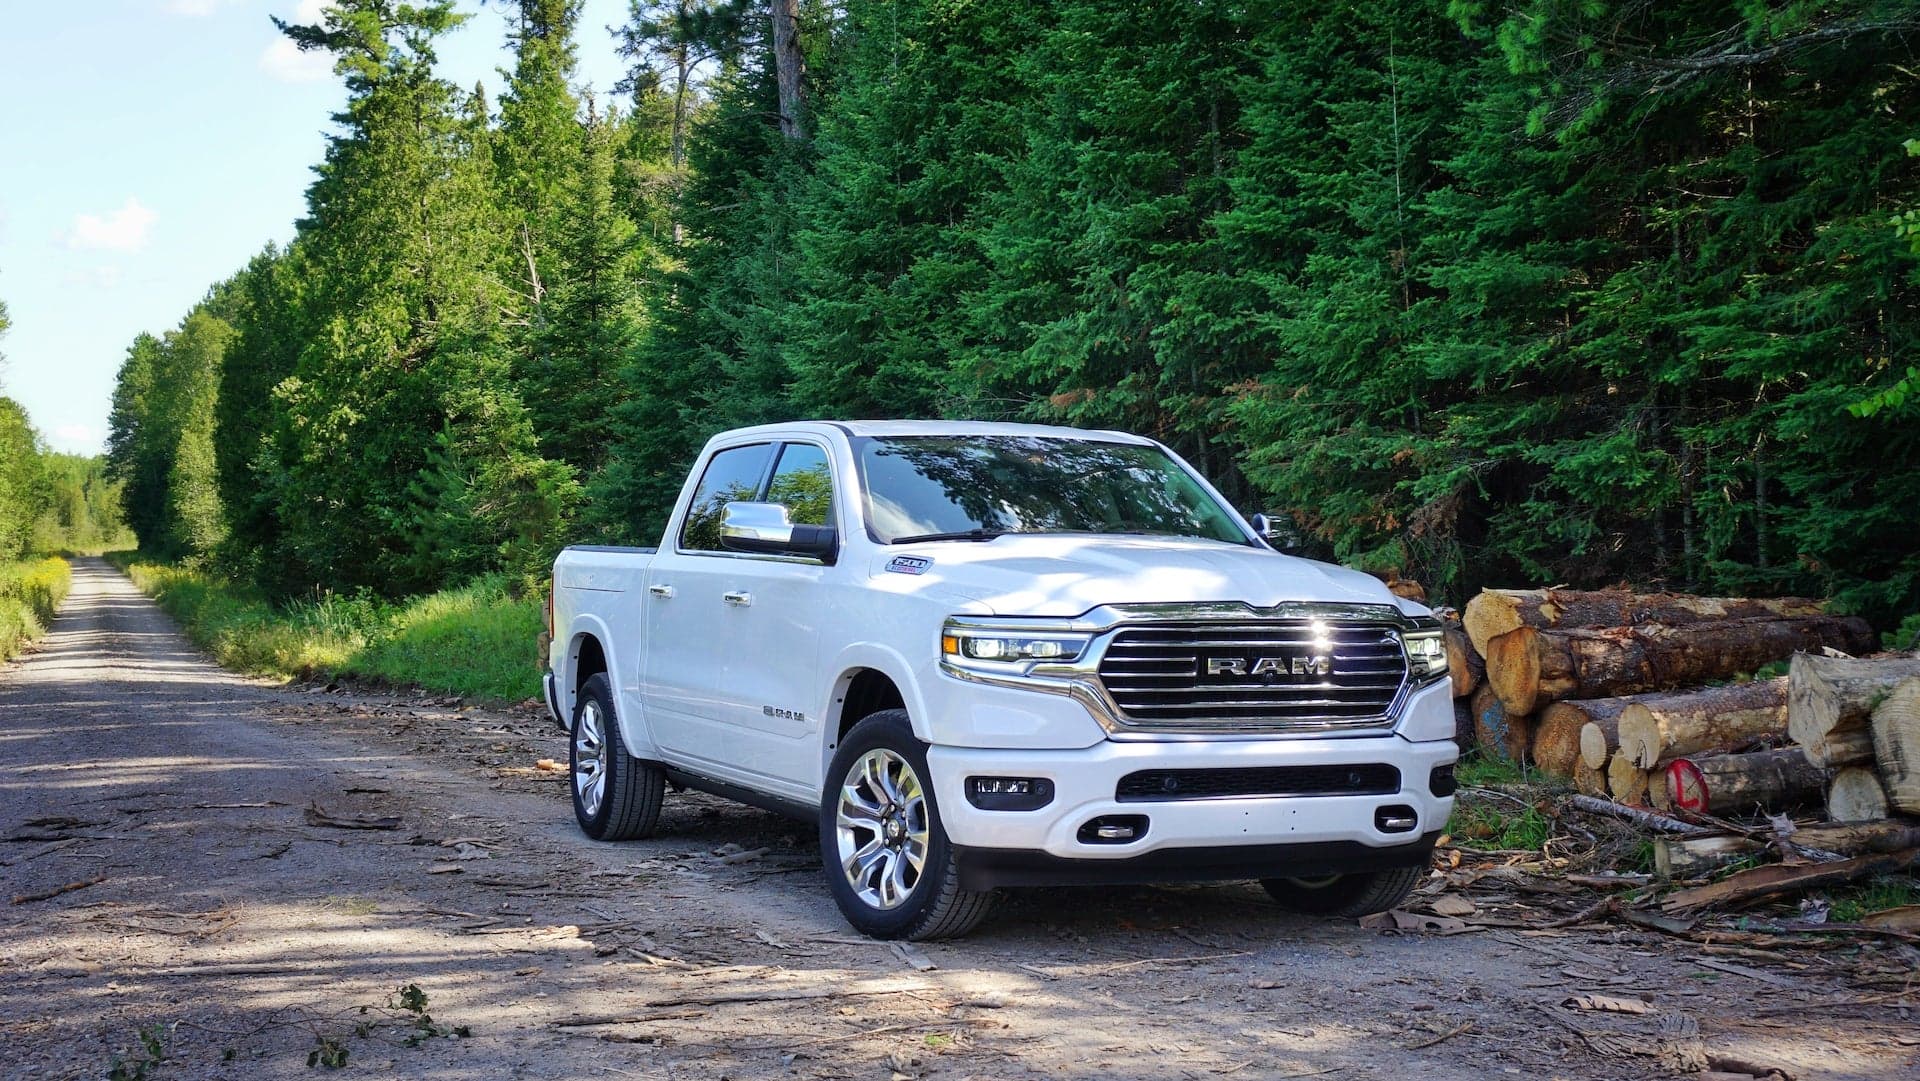 2020 Ram 1500 EcoDiesel First Drive Review: Diesel Done Right